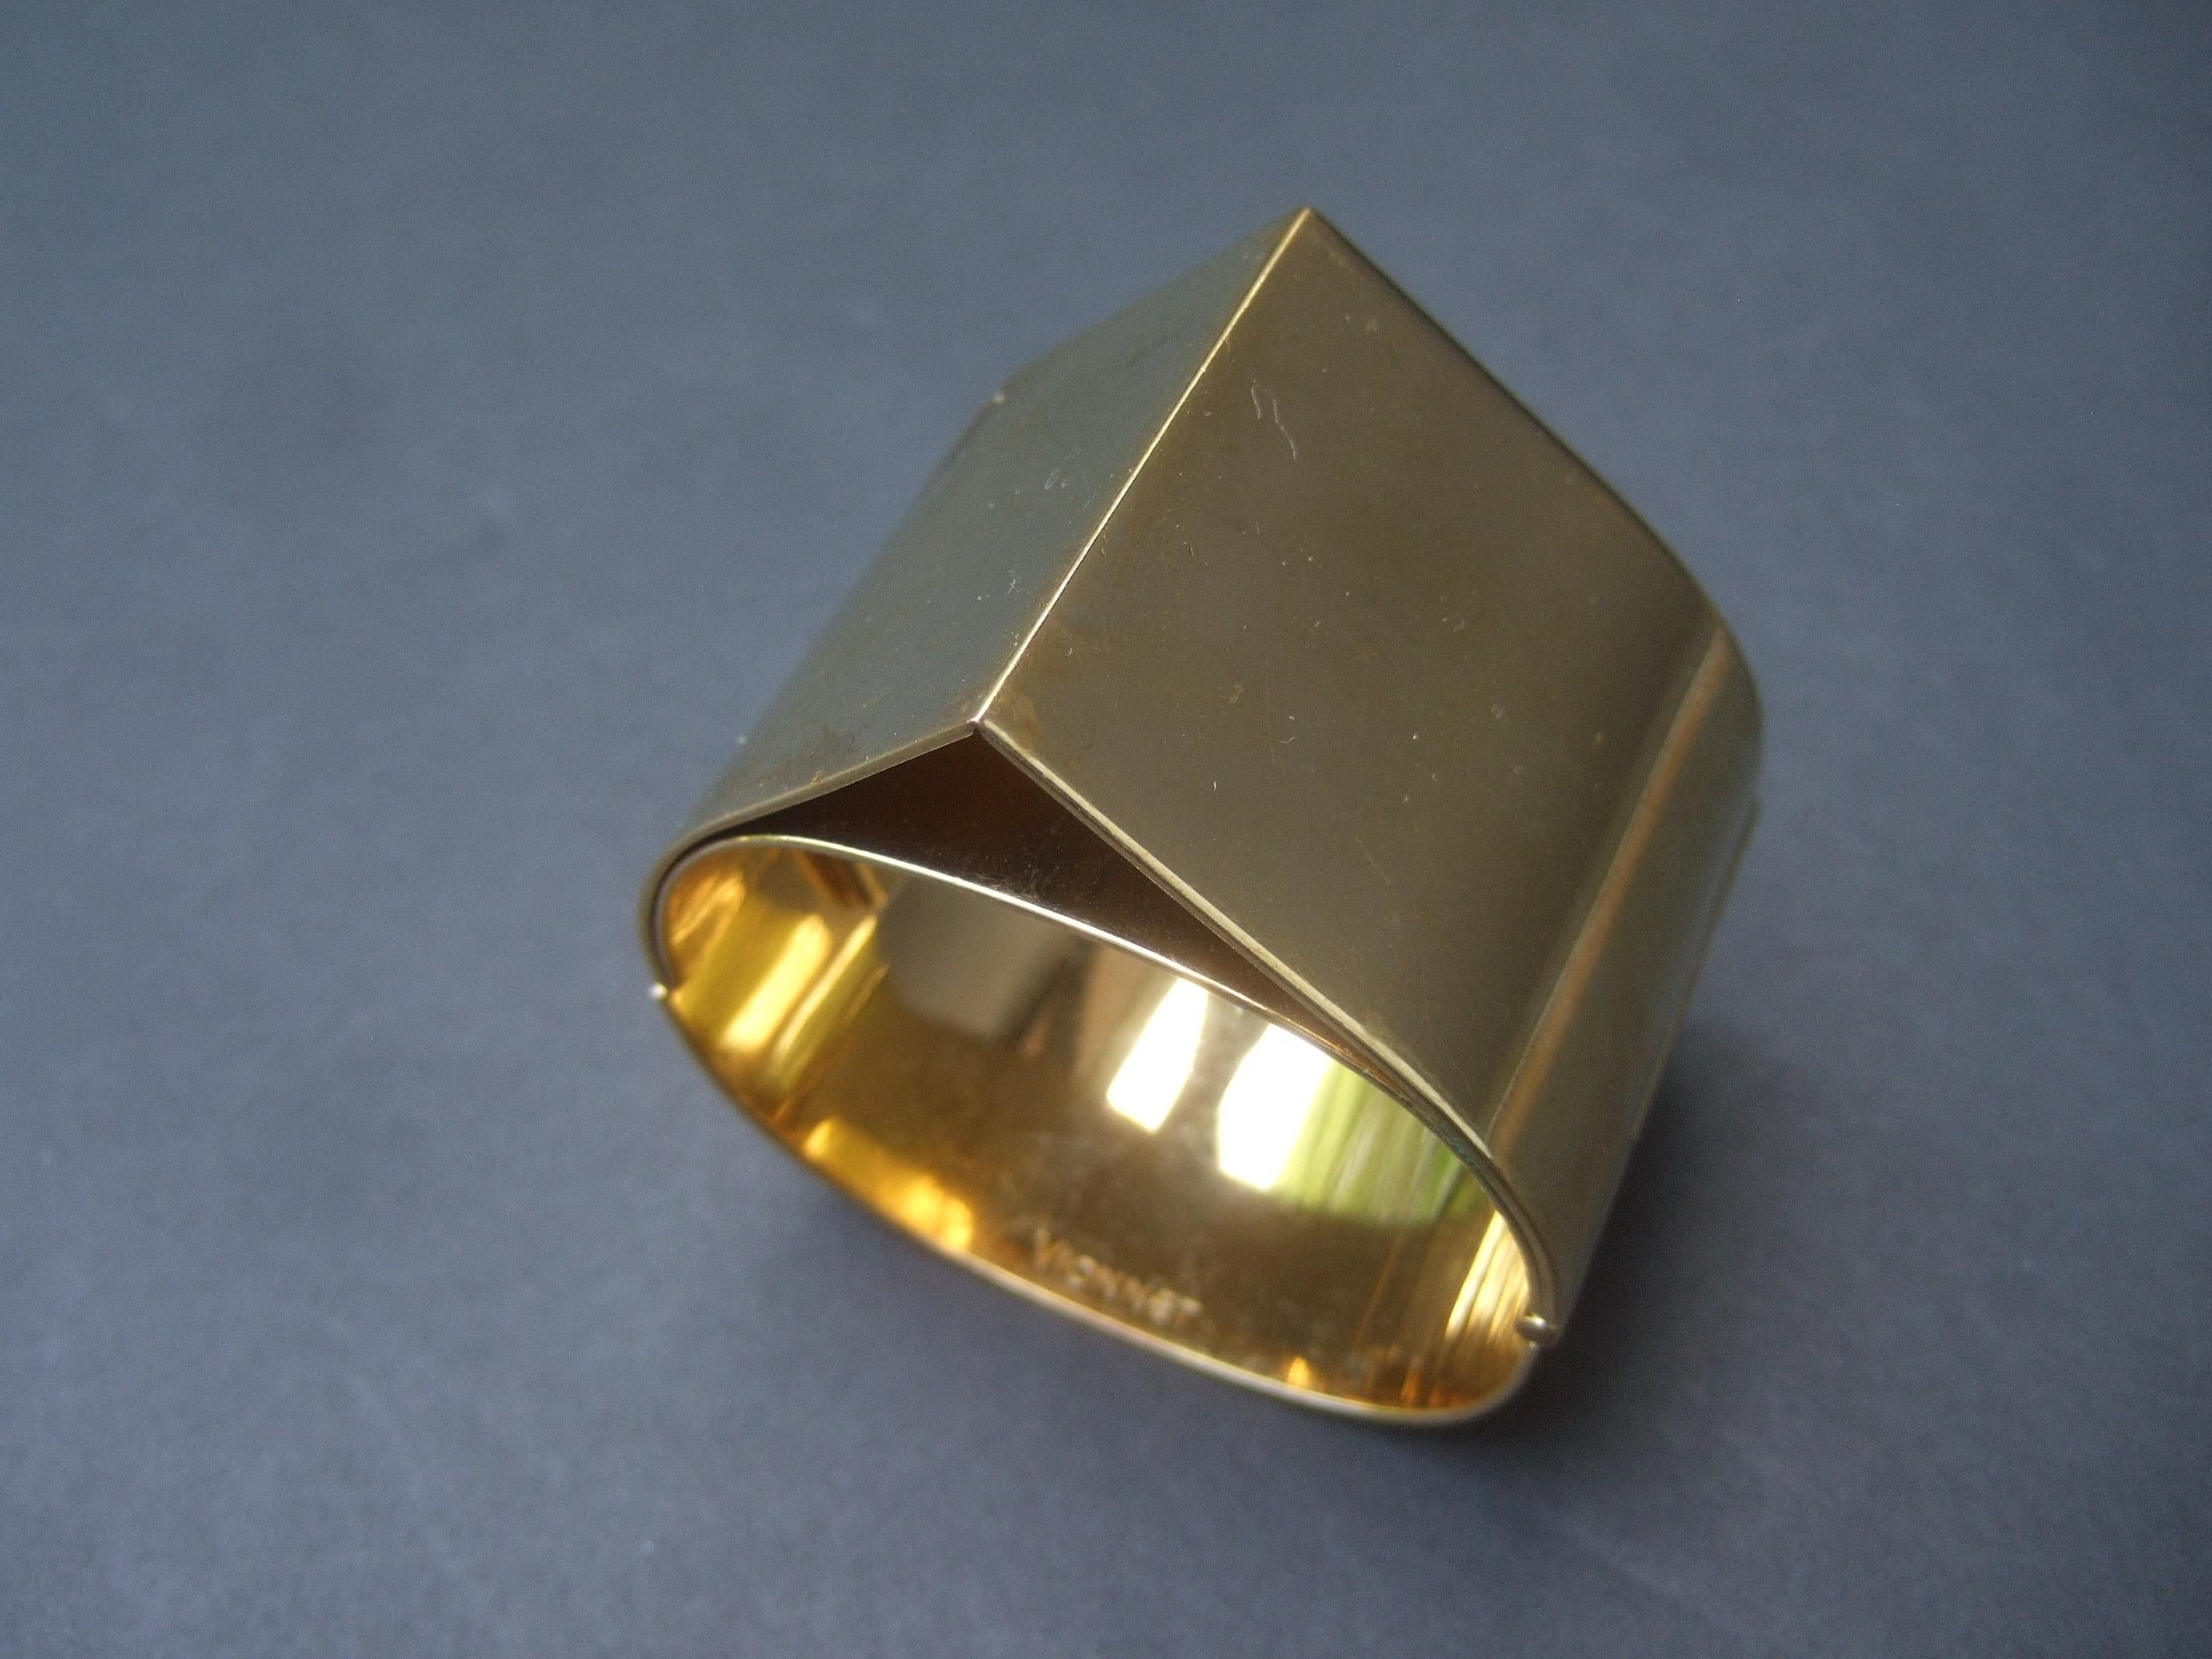 Vionnet Sleek wide gilt metal hinged cuff bracelet c 1990s
The bold severe wide cuff is designed with a triangular pyramid point that converges in the center

Makes a very chic eyecatching accessory 
The interior band is inscribed: Vionnet